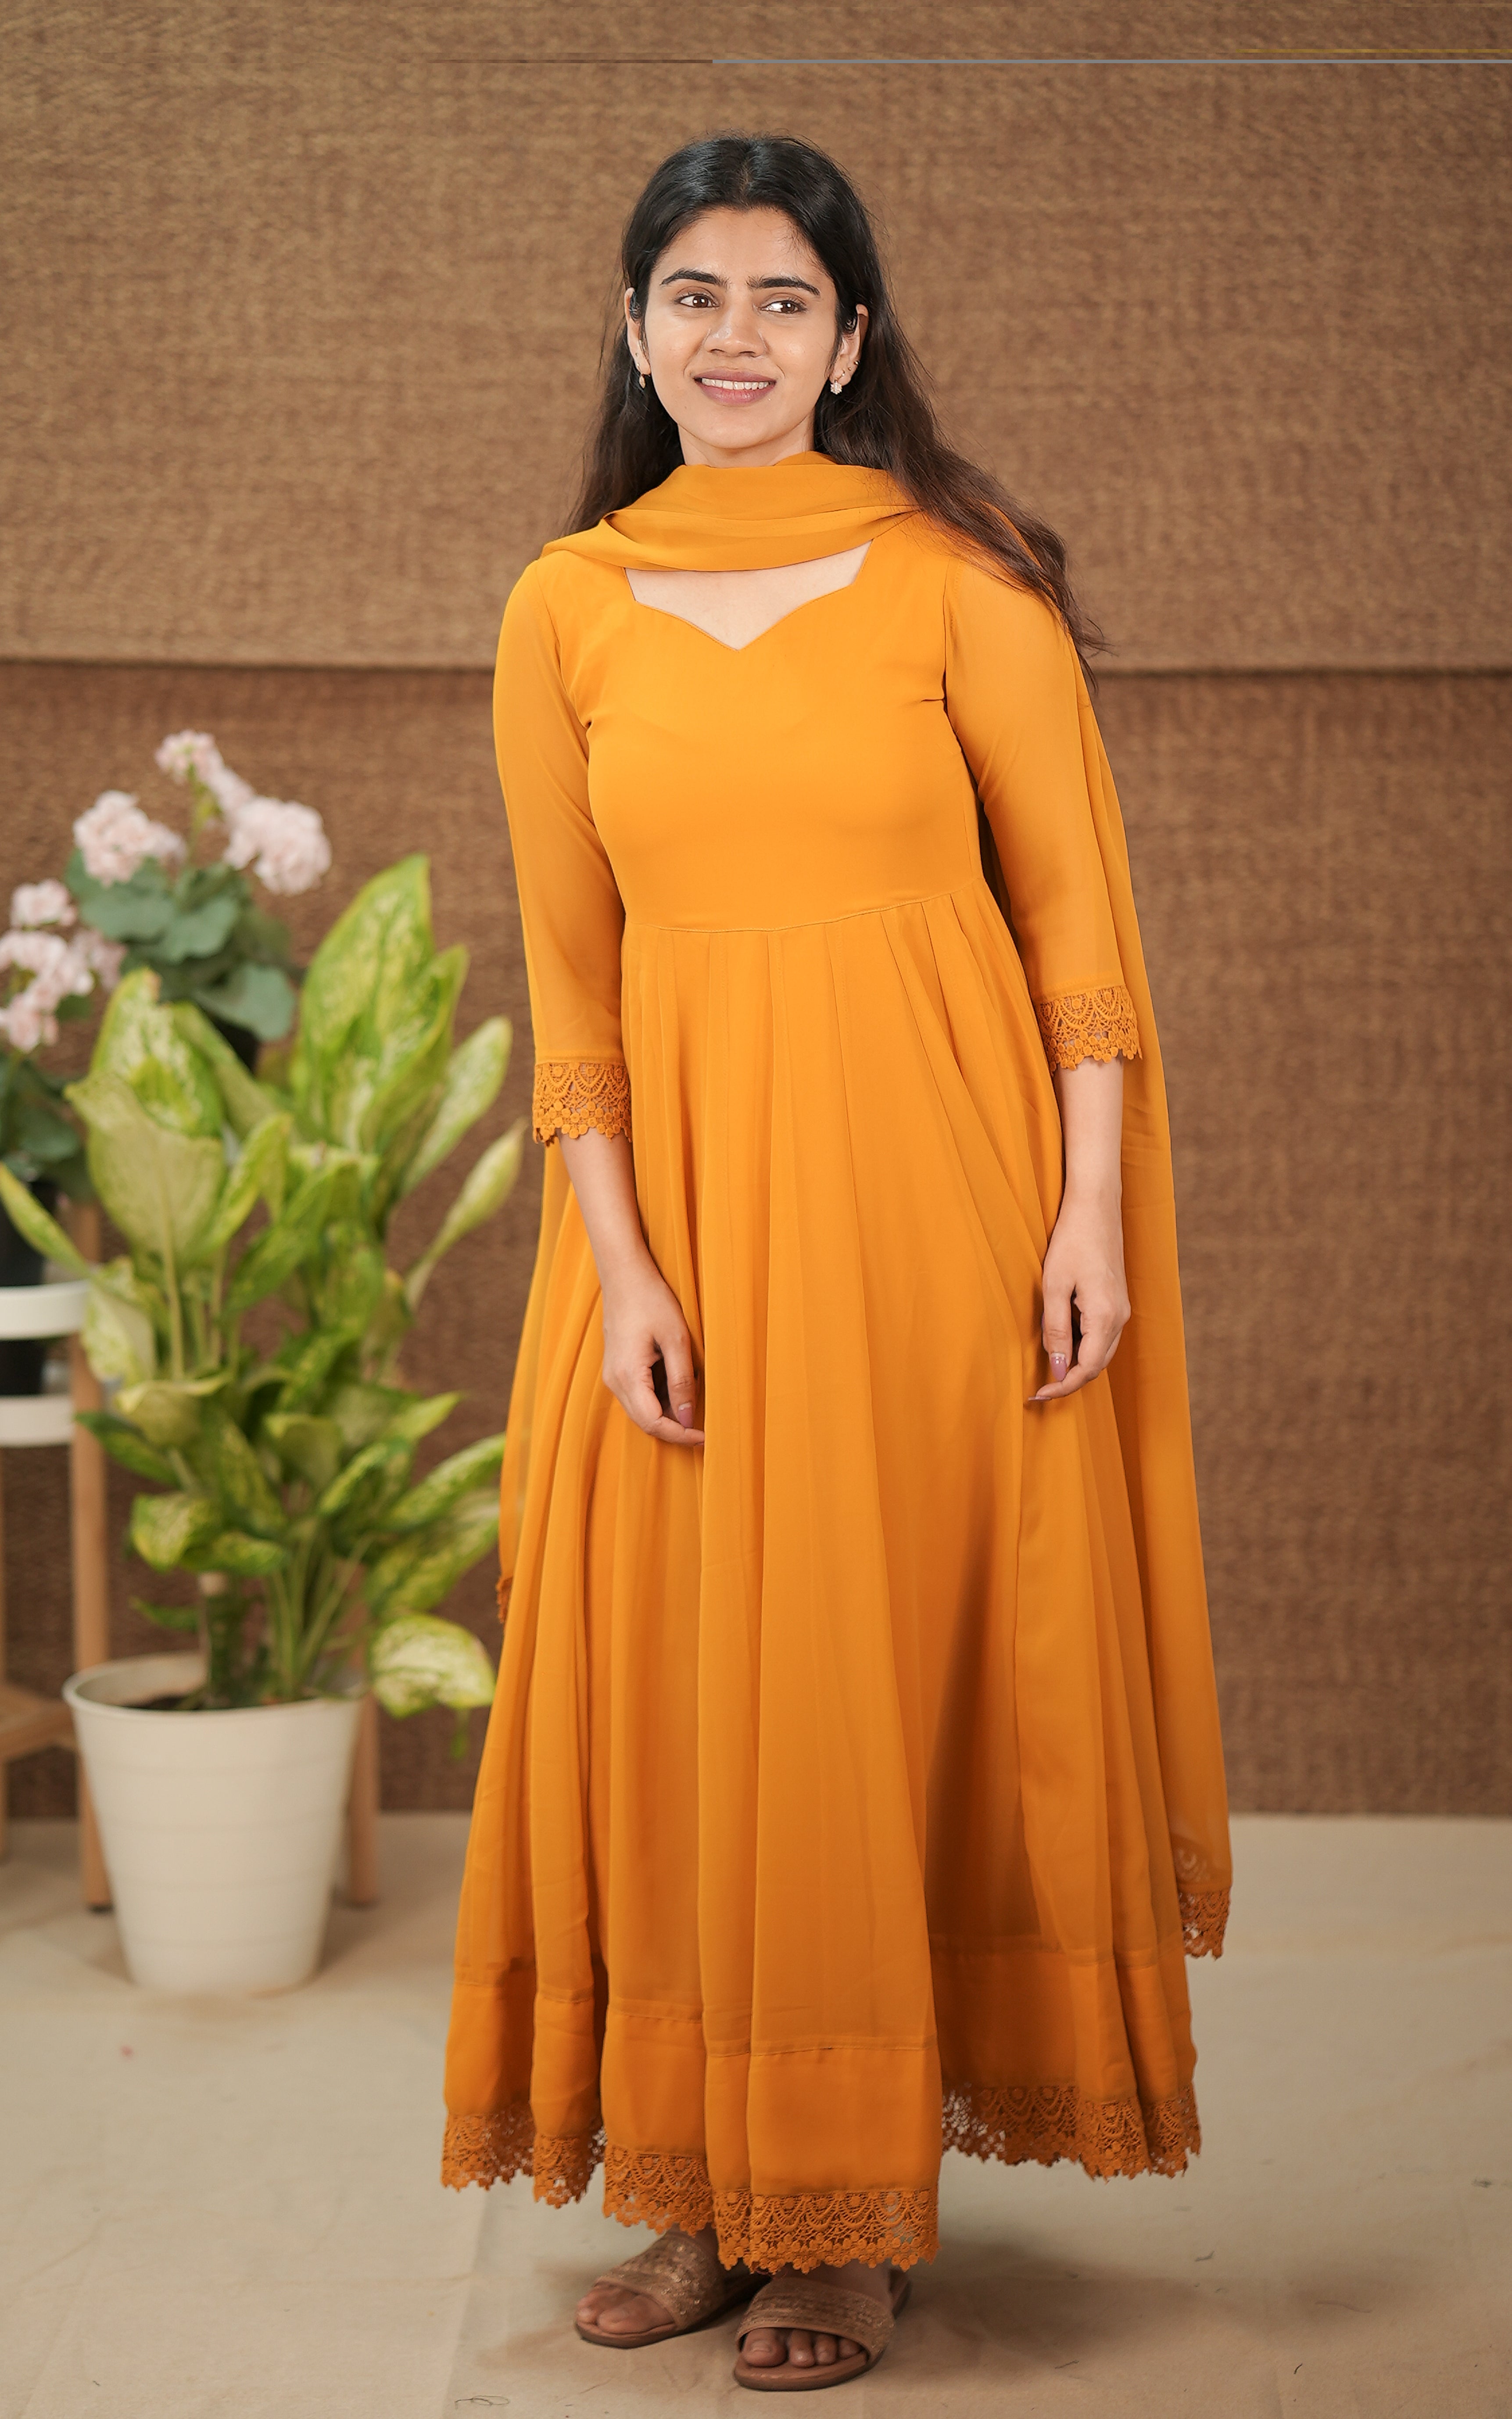 instore kurti melodic mustard (kurti+dupatta) georgette with butter crepe lining full flared anarkali with crochet lace border color: mustard